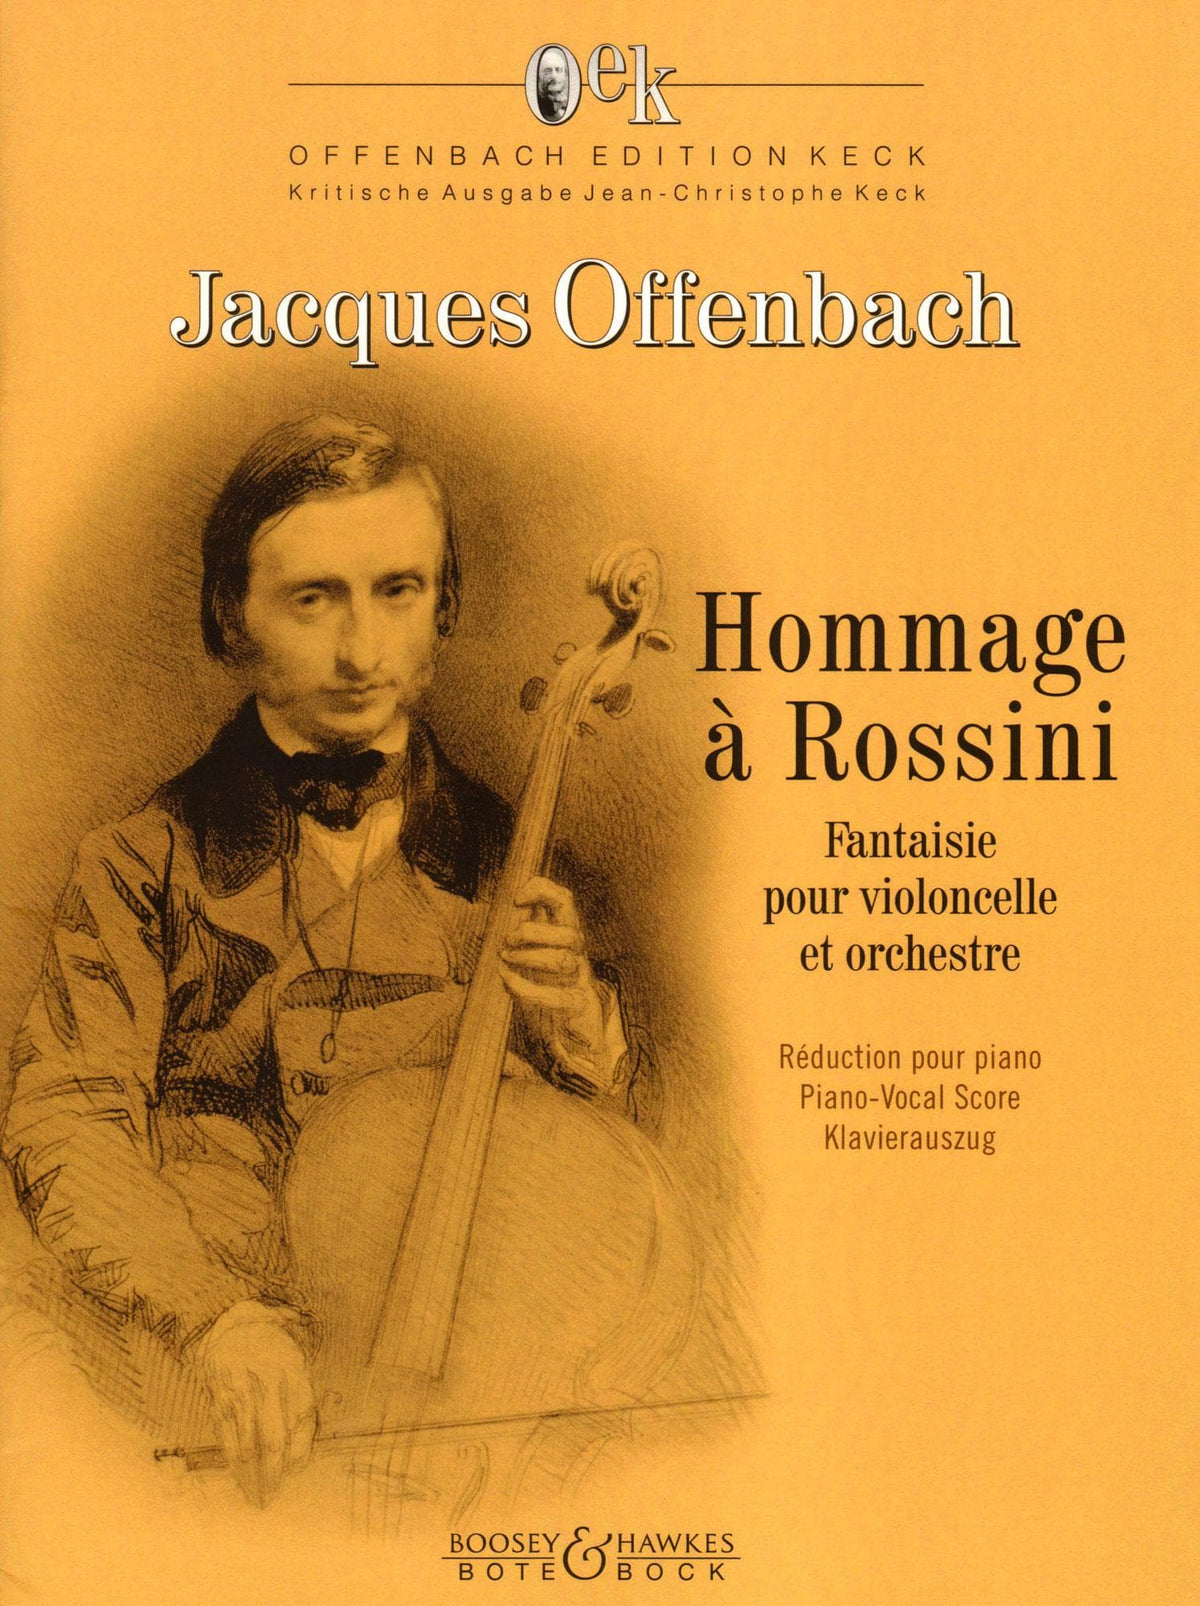 Offenbach, Jacques - Hommage a Rossini - for Cello and Piano - edited by Keck - Boosey & Hawkes